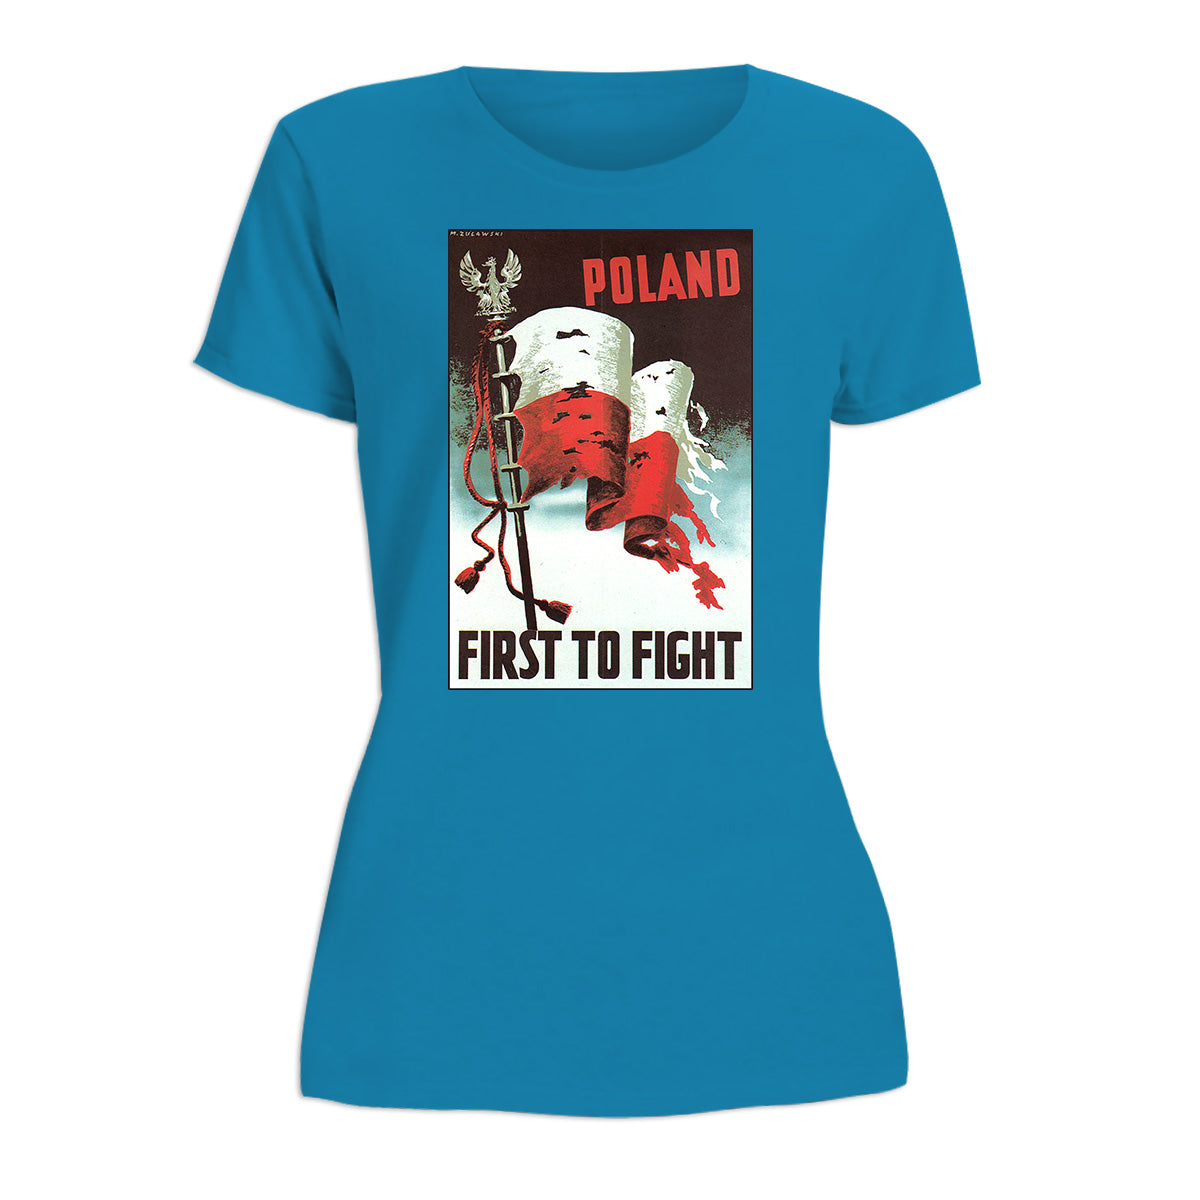 Vintage Poster 1939 Poland First To Fight Women's Short Sleeve Tshirt